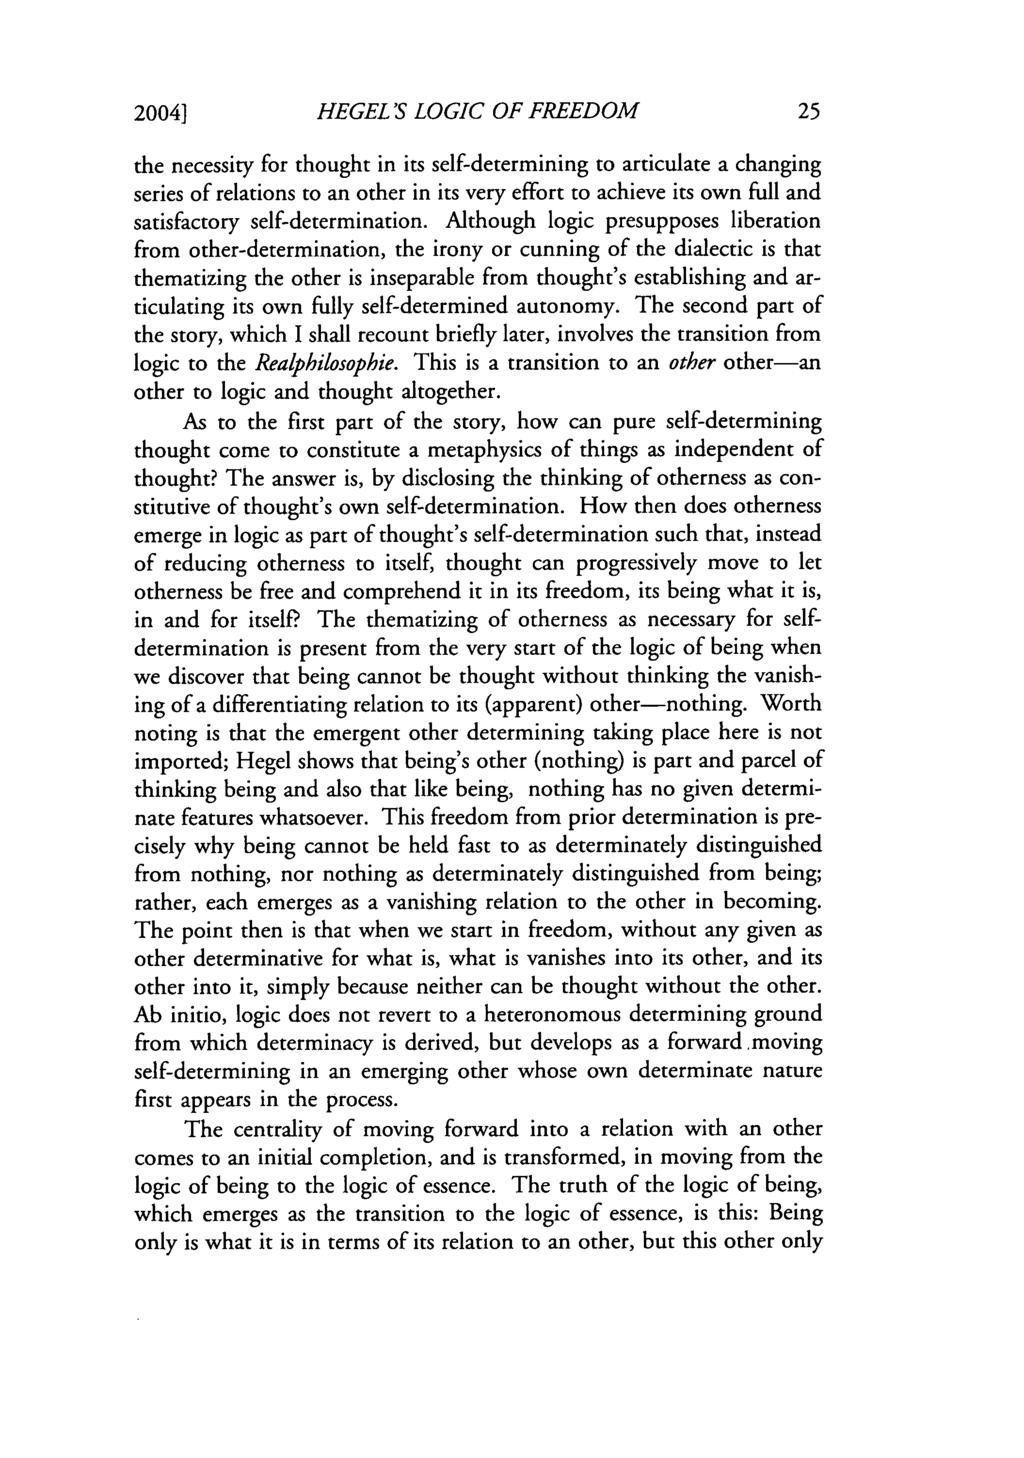 2004] HEGEL "S LOGIC OF FREEDOM the necessity for thought in its self-determining to articulate a changing series of relations to an other in its very effort to achieve its own full and satisfactory